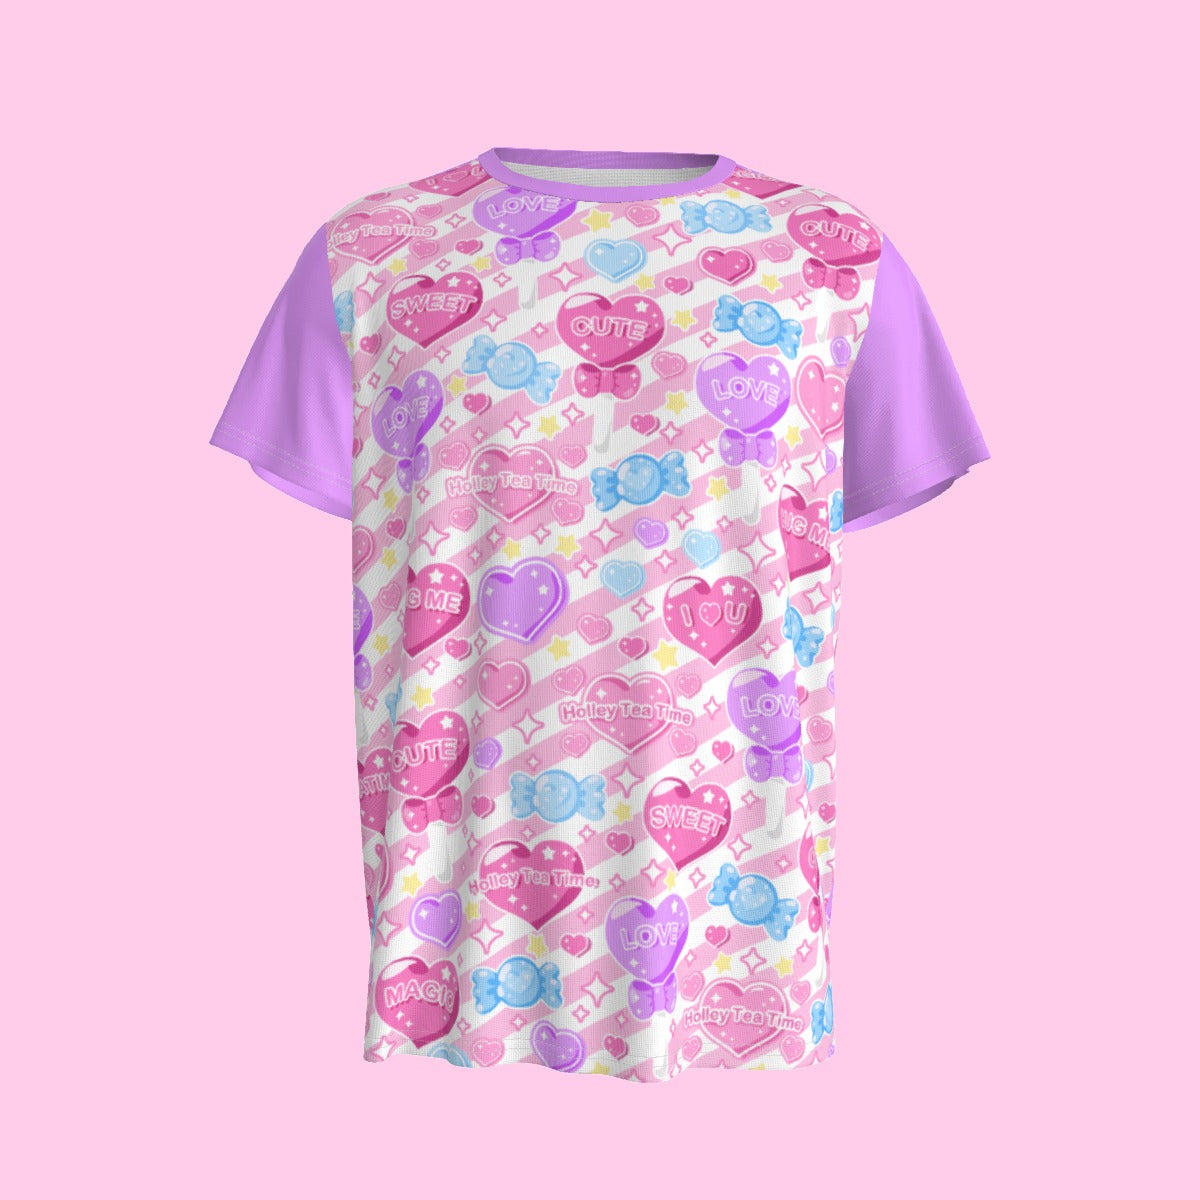 Candy Love Hearts (Colorful Cutie) Men's Round Neck Short Sleeve T-Shirt